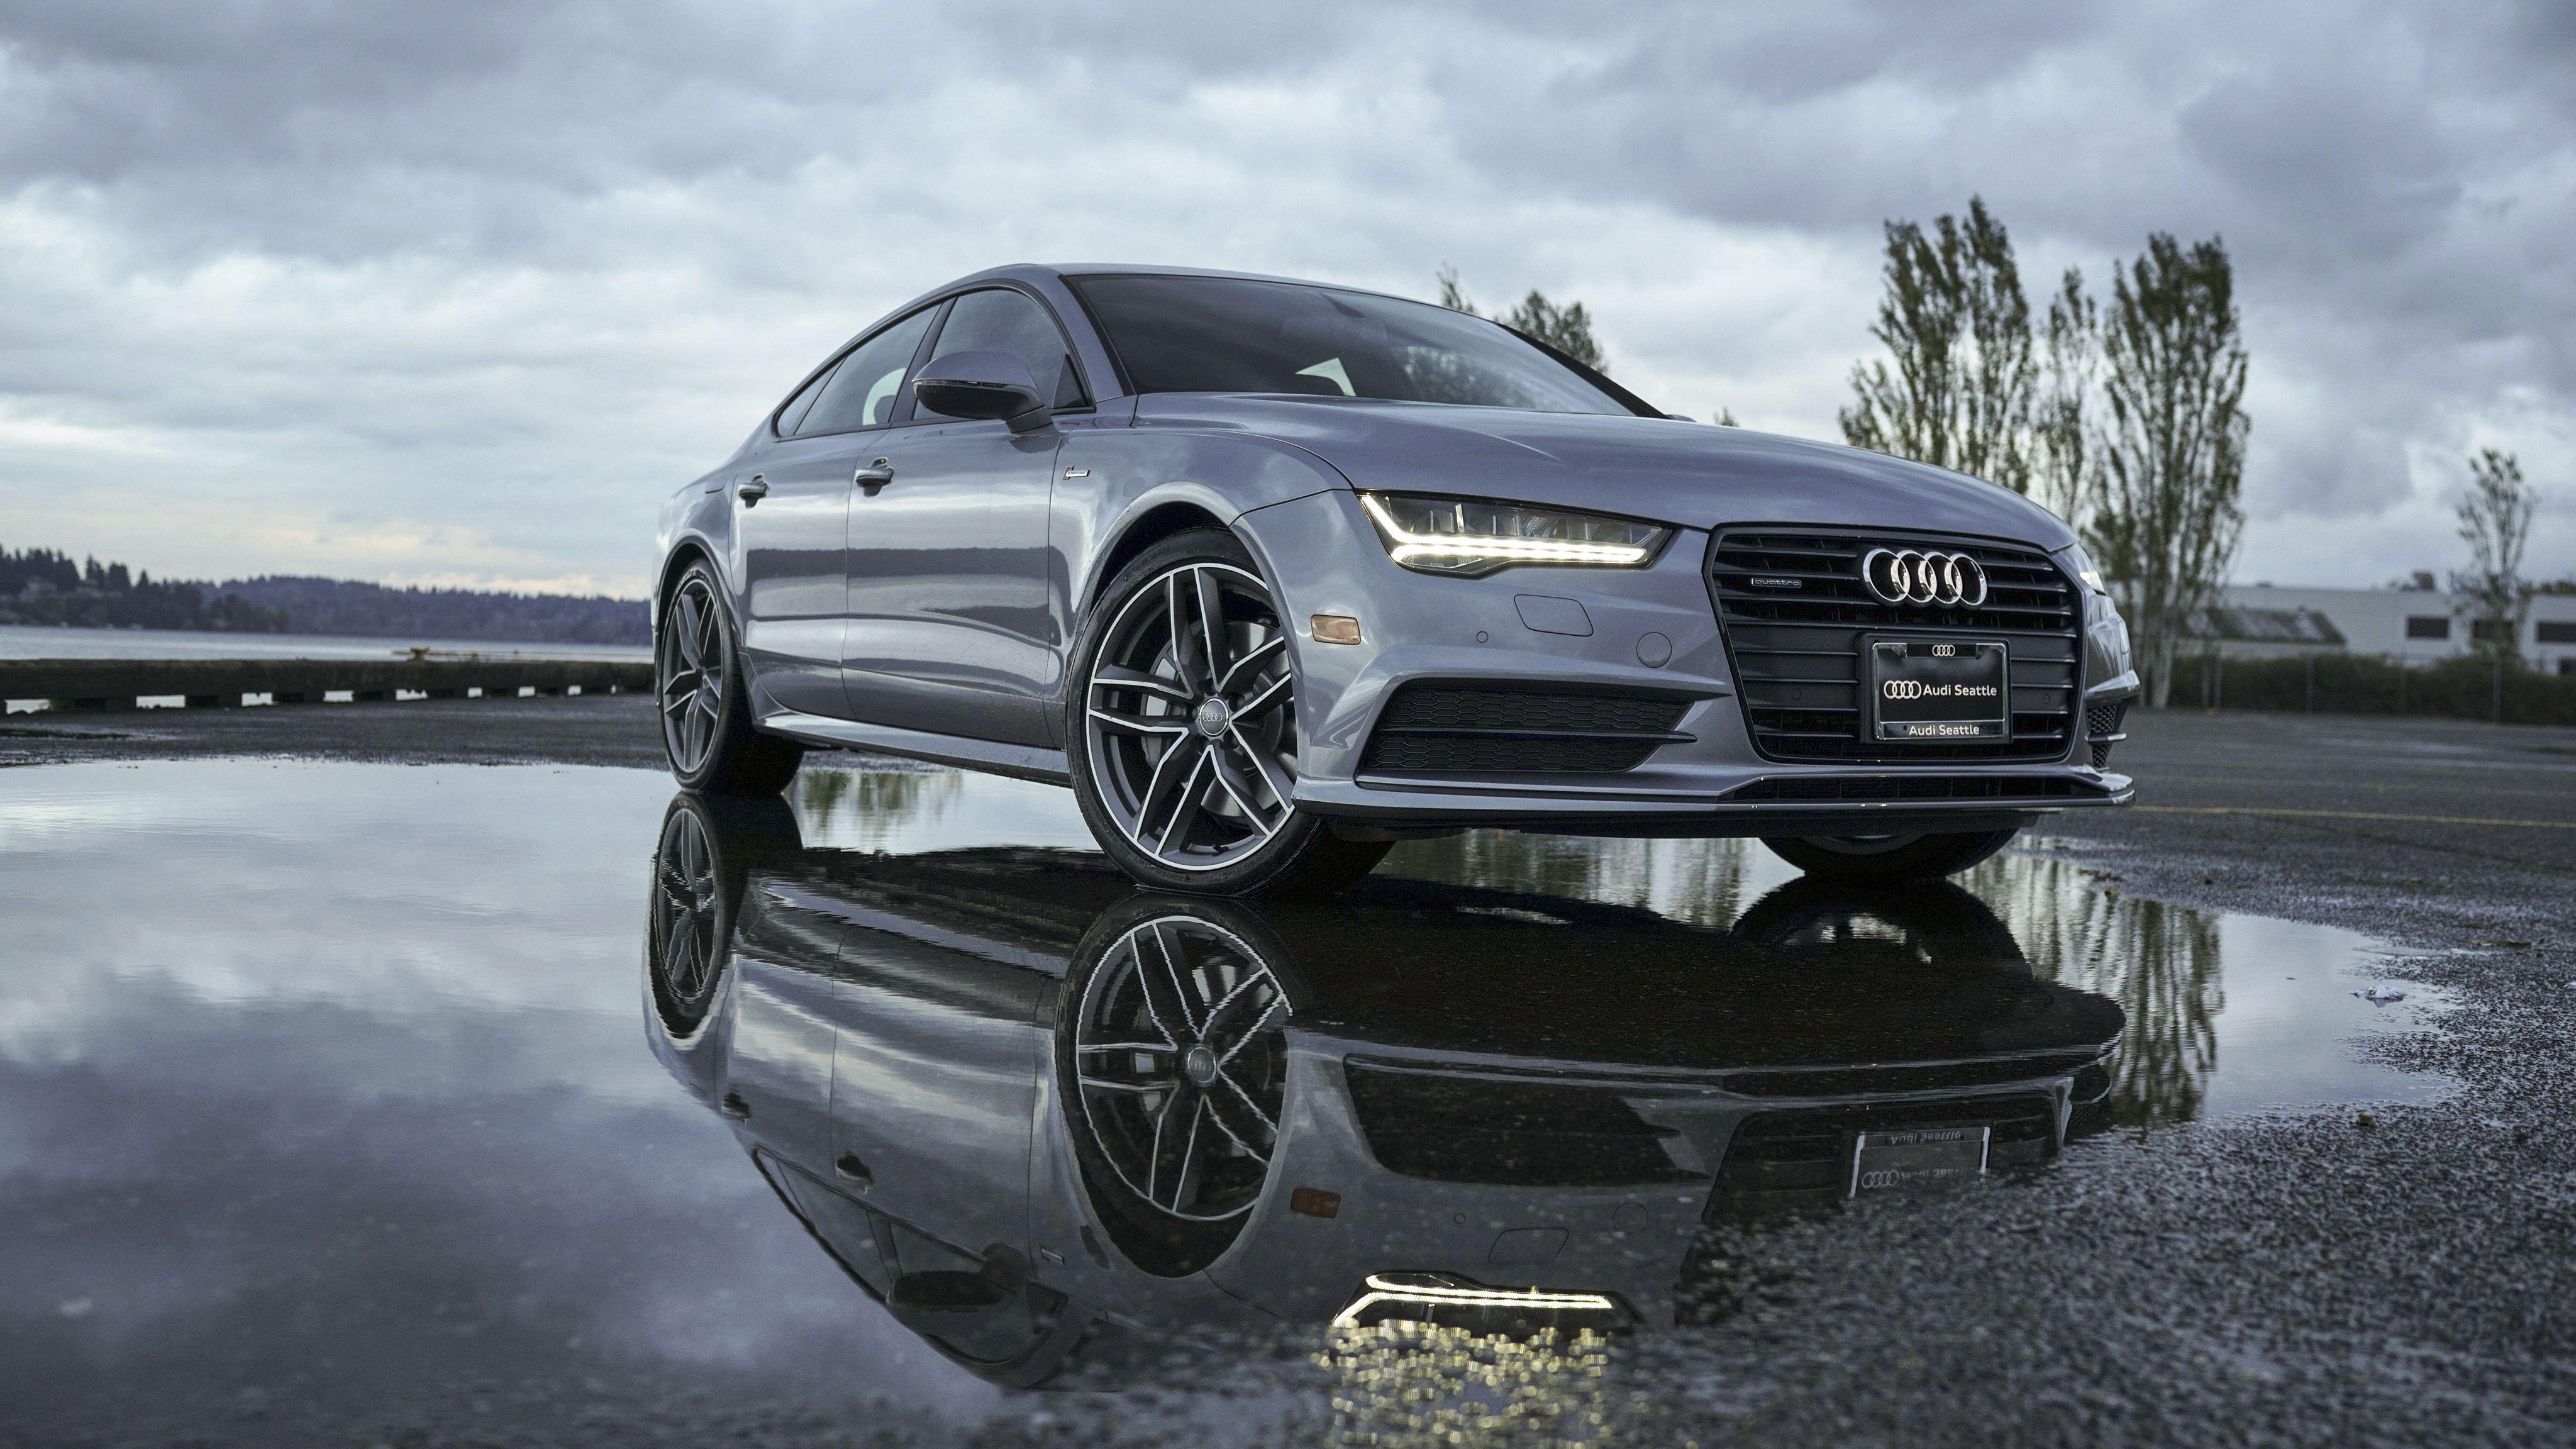 Audi Pc Wallpapers Top Free Audi Pc Backgrounds Wallpaperaccess